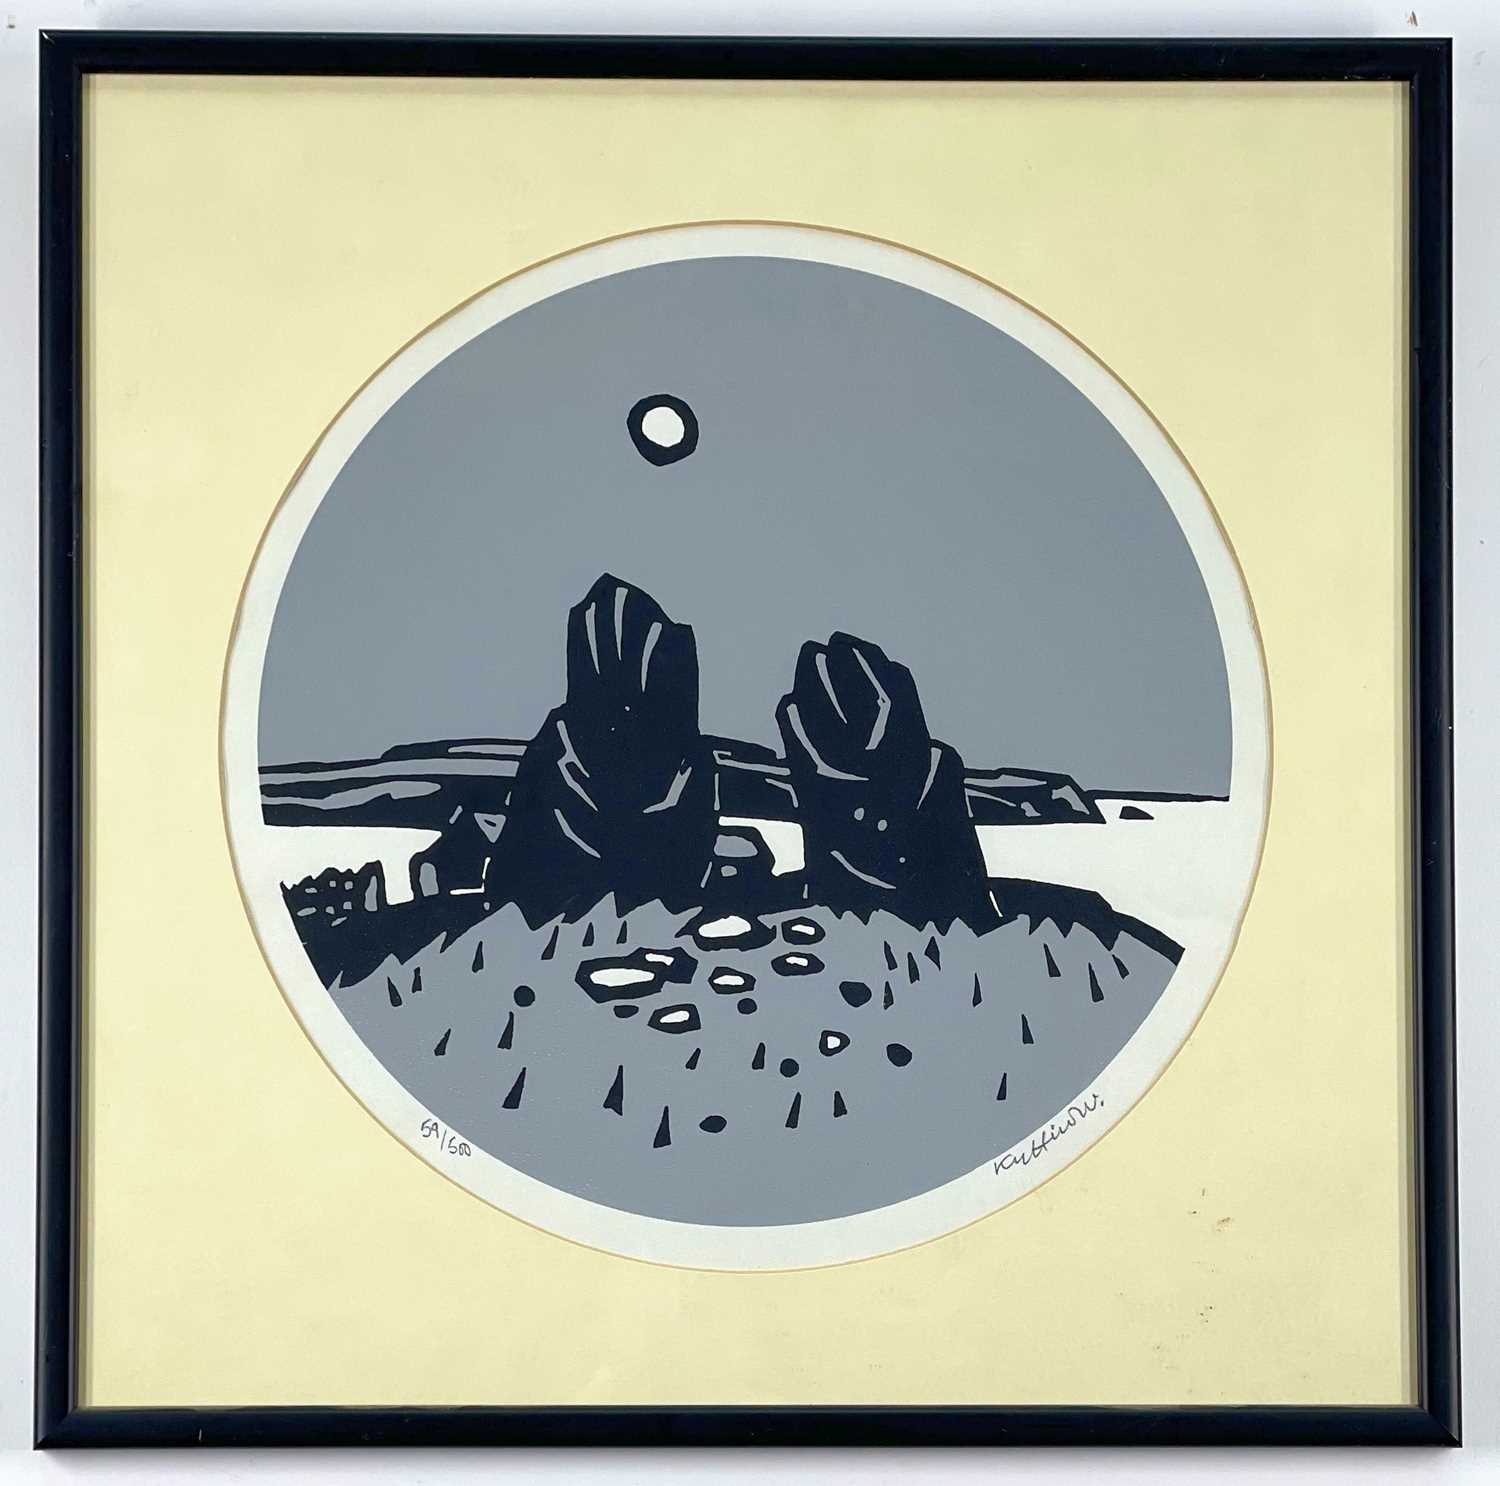 ‡ SIR KYFFIN WILLIAMS RA coloured limited edition (59/500) print - circular format 'The Two Standing - Image 2 of 2